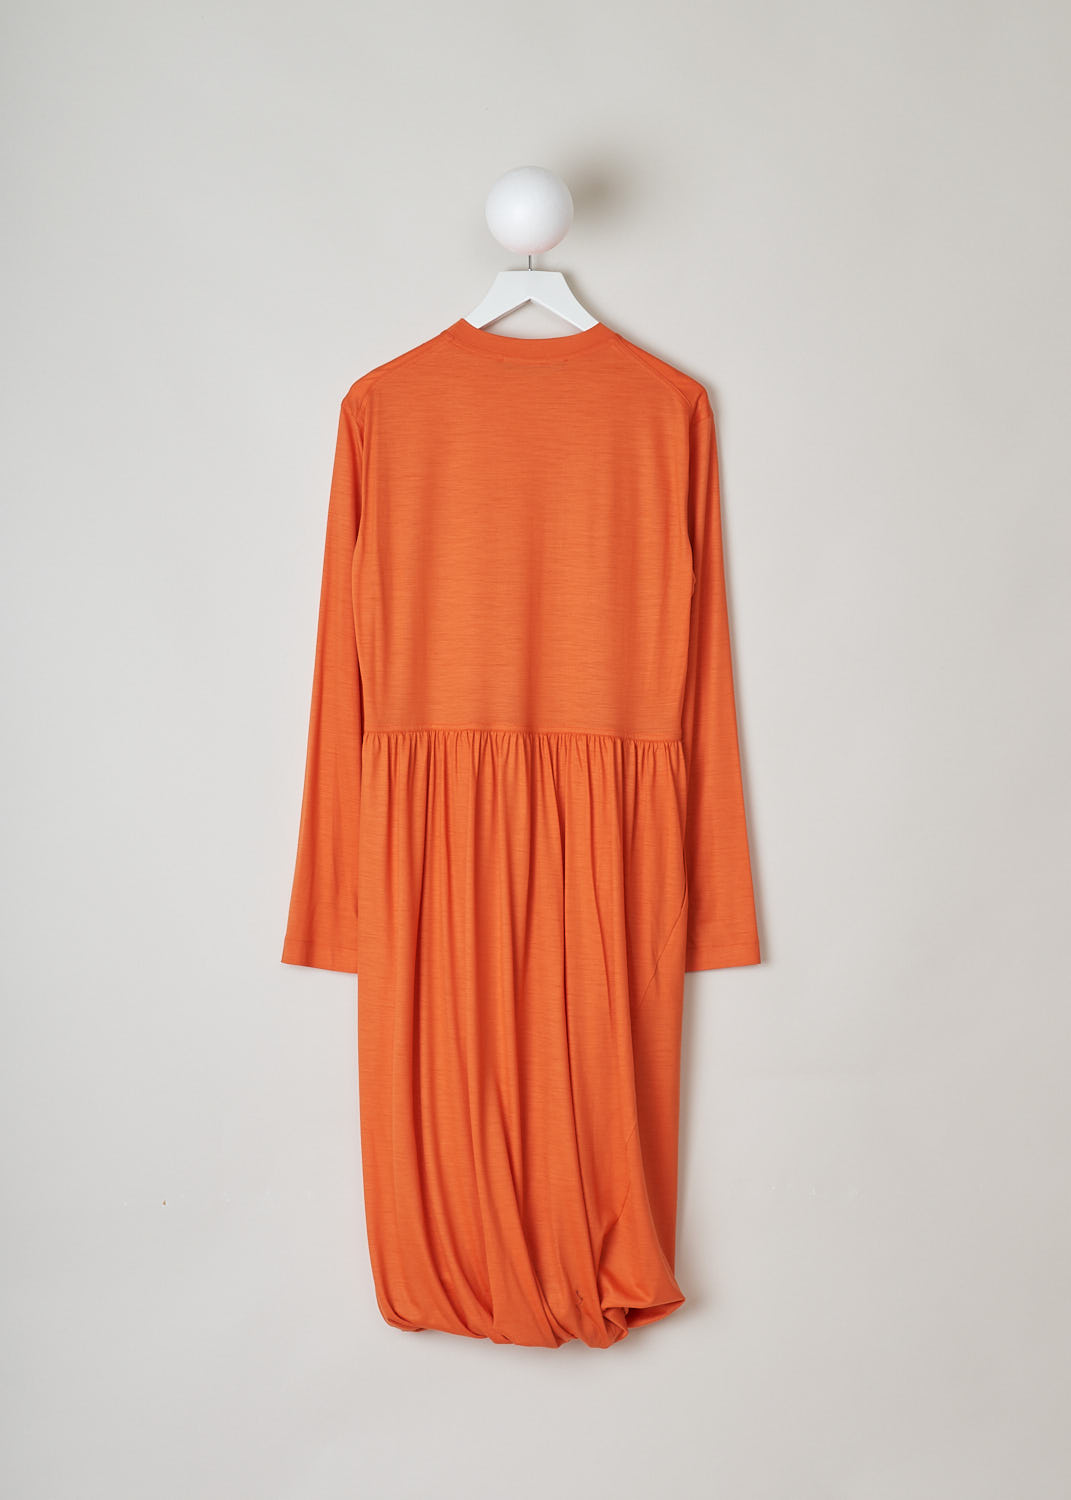 SOFIE Dâ€™HOORE, ORANGE LONG SLEEVE DRESS, DEMURE_WOJE_PAPAYA, Orange, Back, This orange mid-length dress features a round neckline, a plain long sleeve bodice and a twisted balloon skirt. A single side pocket can be found concealed in the seam. 
